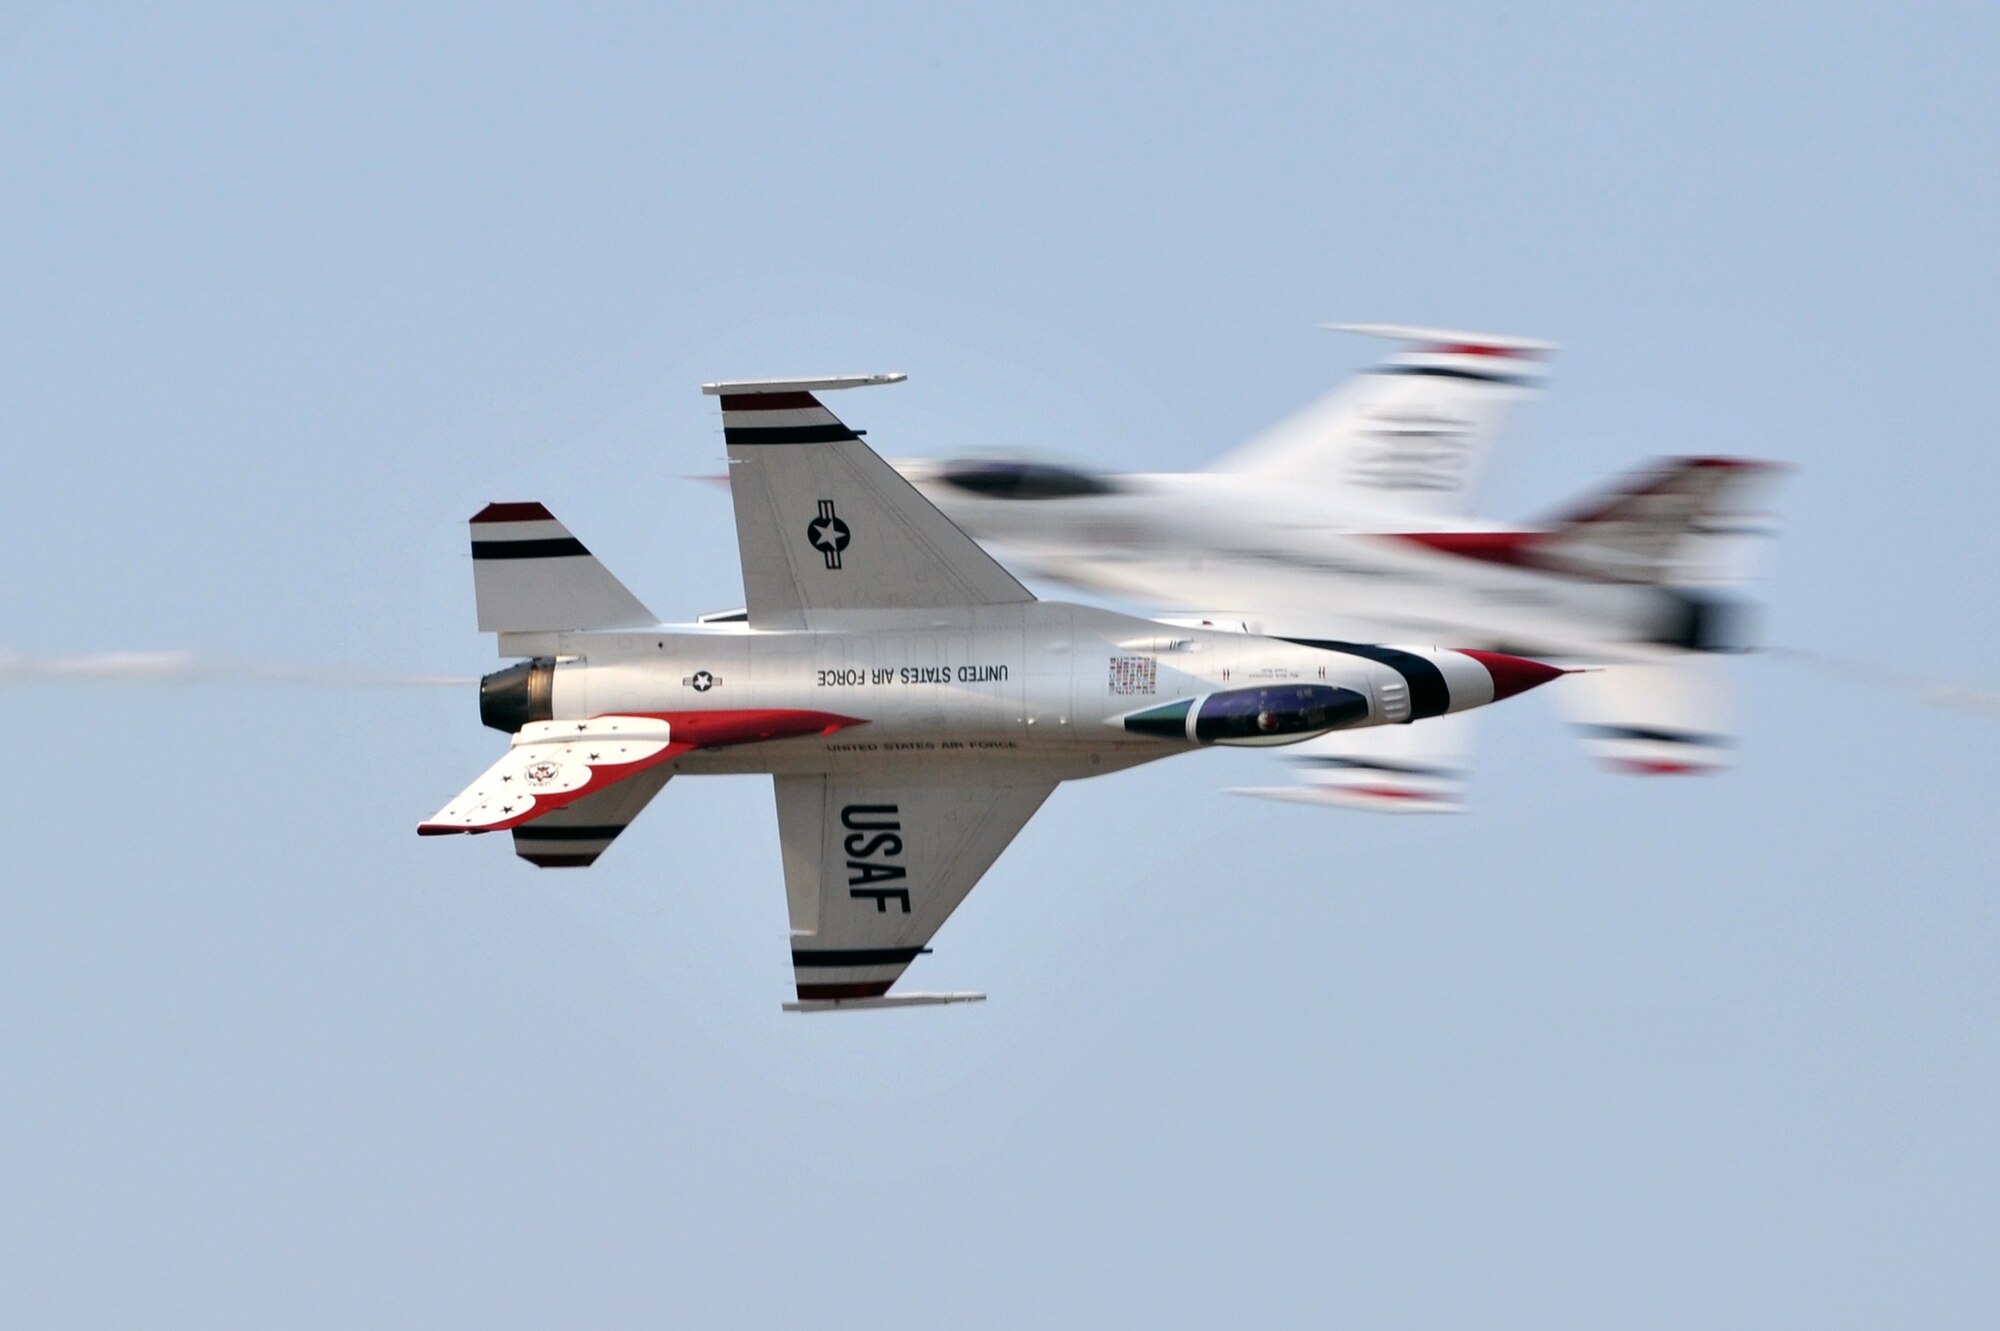 Member of the Air Force Thunderbirds F-16 demonstration team soar above Little Rock Air Force Base during the Thunder Over the Rock air show Oct. 9. The demonstration team is one of 18 performers appearing at the two-day event. (U.S. Air Force photo by Staff Sgt. Chris Willis)